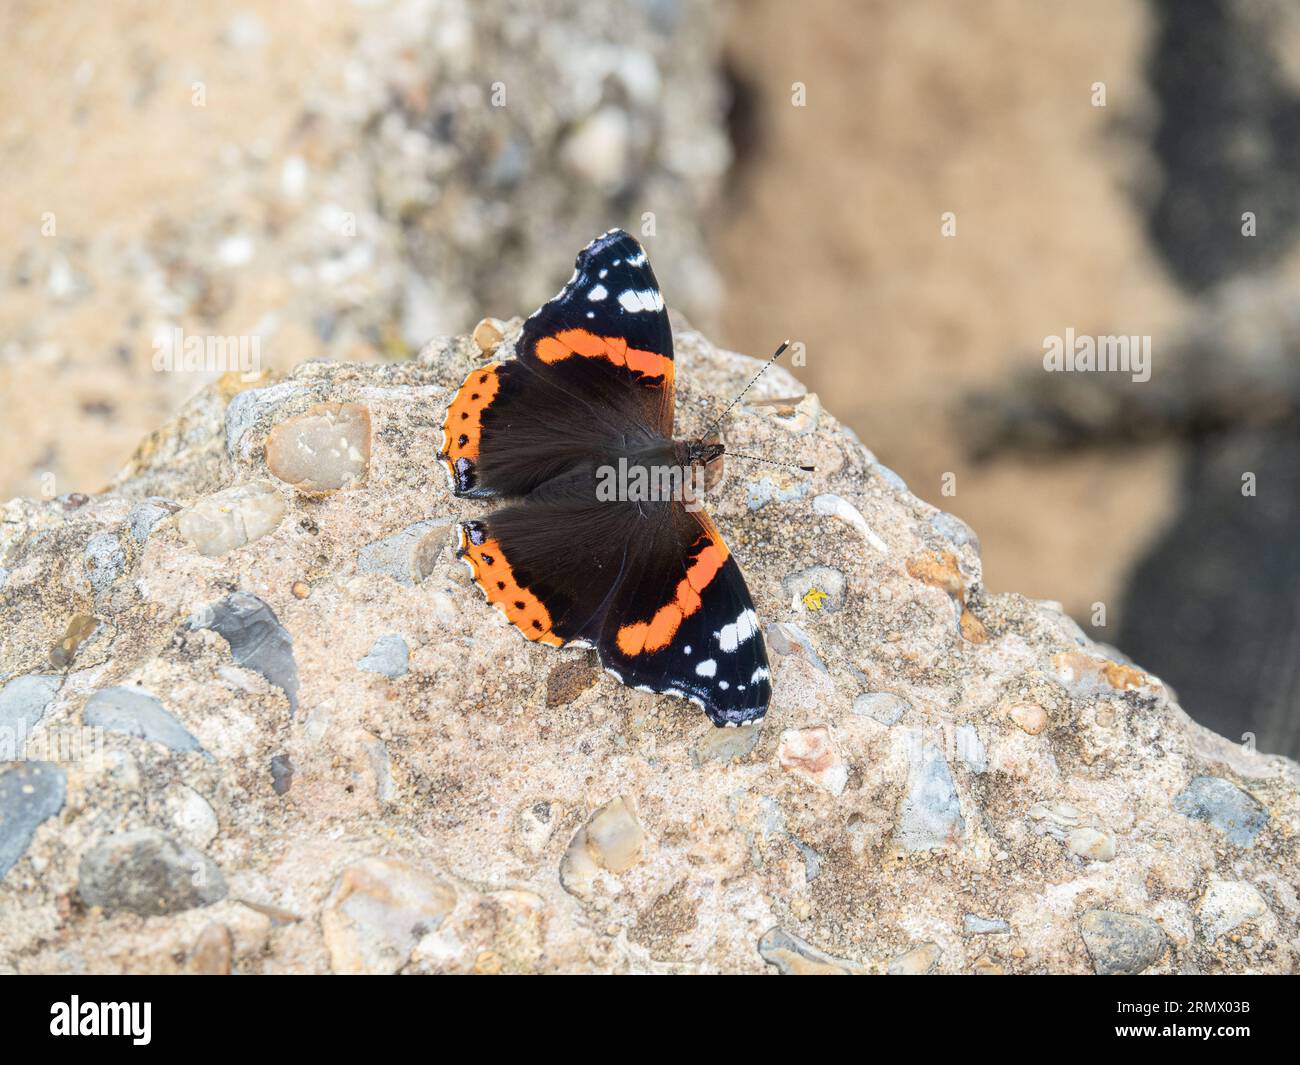 A close up of a red admiral butterfly (Vanessa atalanta) resting on a rock Stock Photo